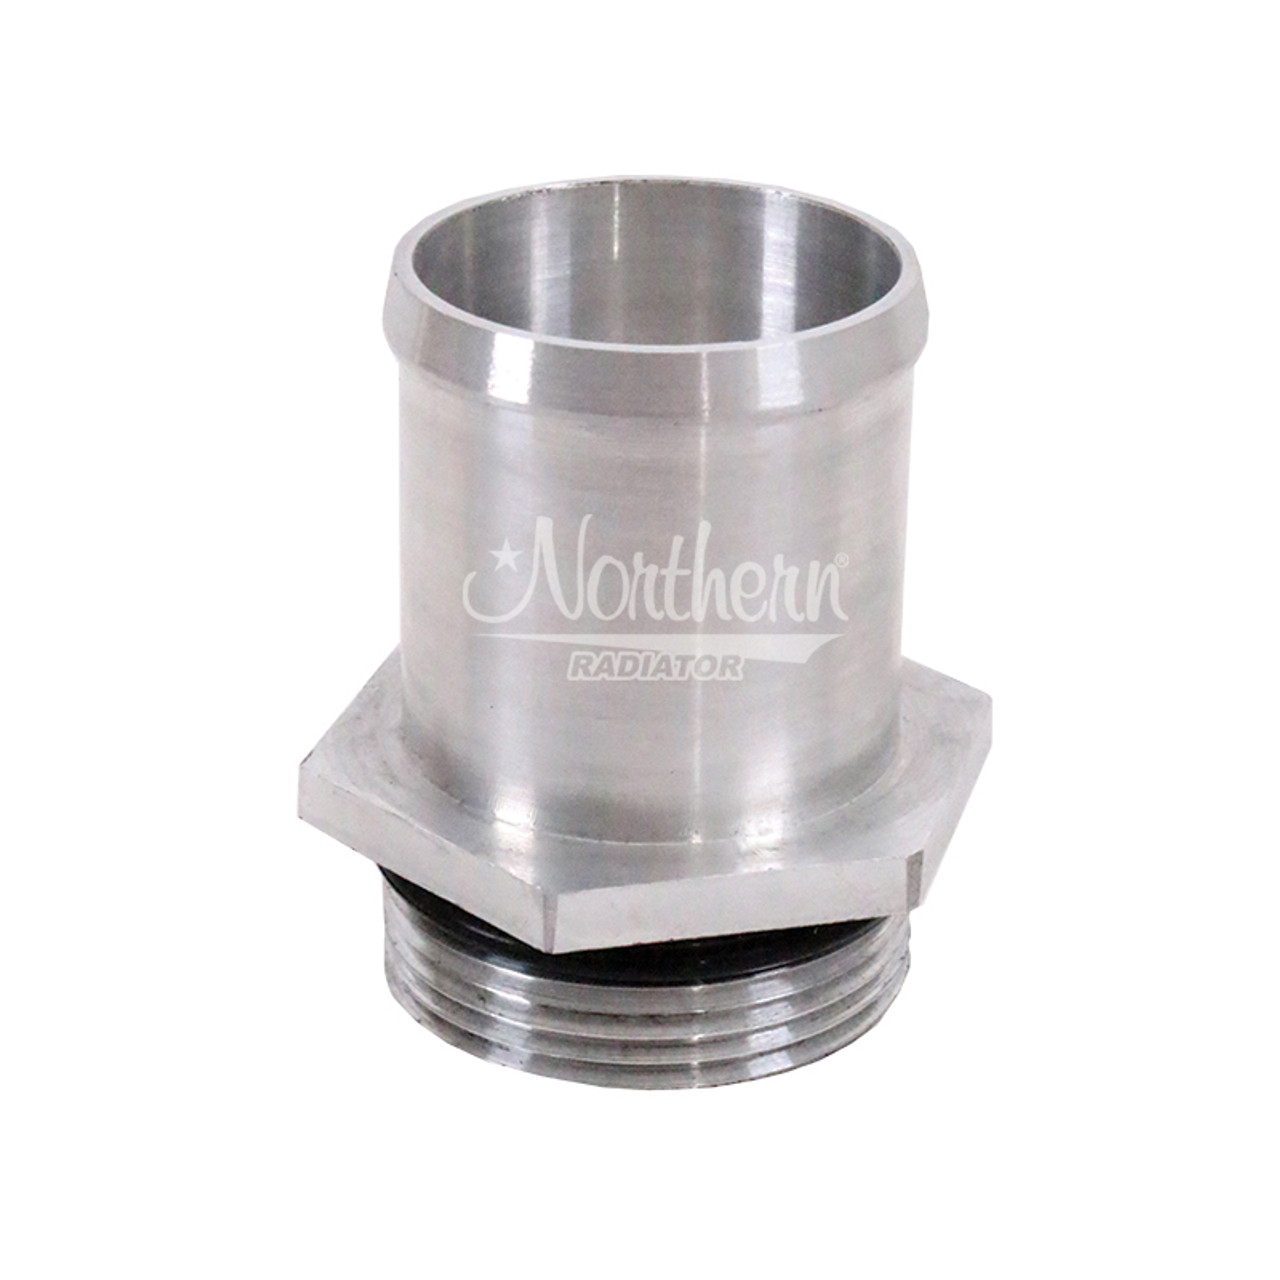 Northern Radiator Inlet Fitting 1-5/8in x 1-1/2in - NRAZ17548